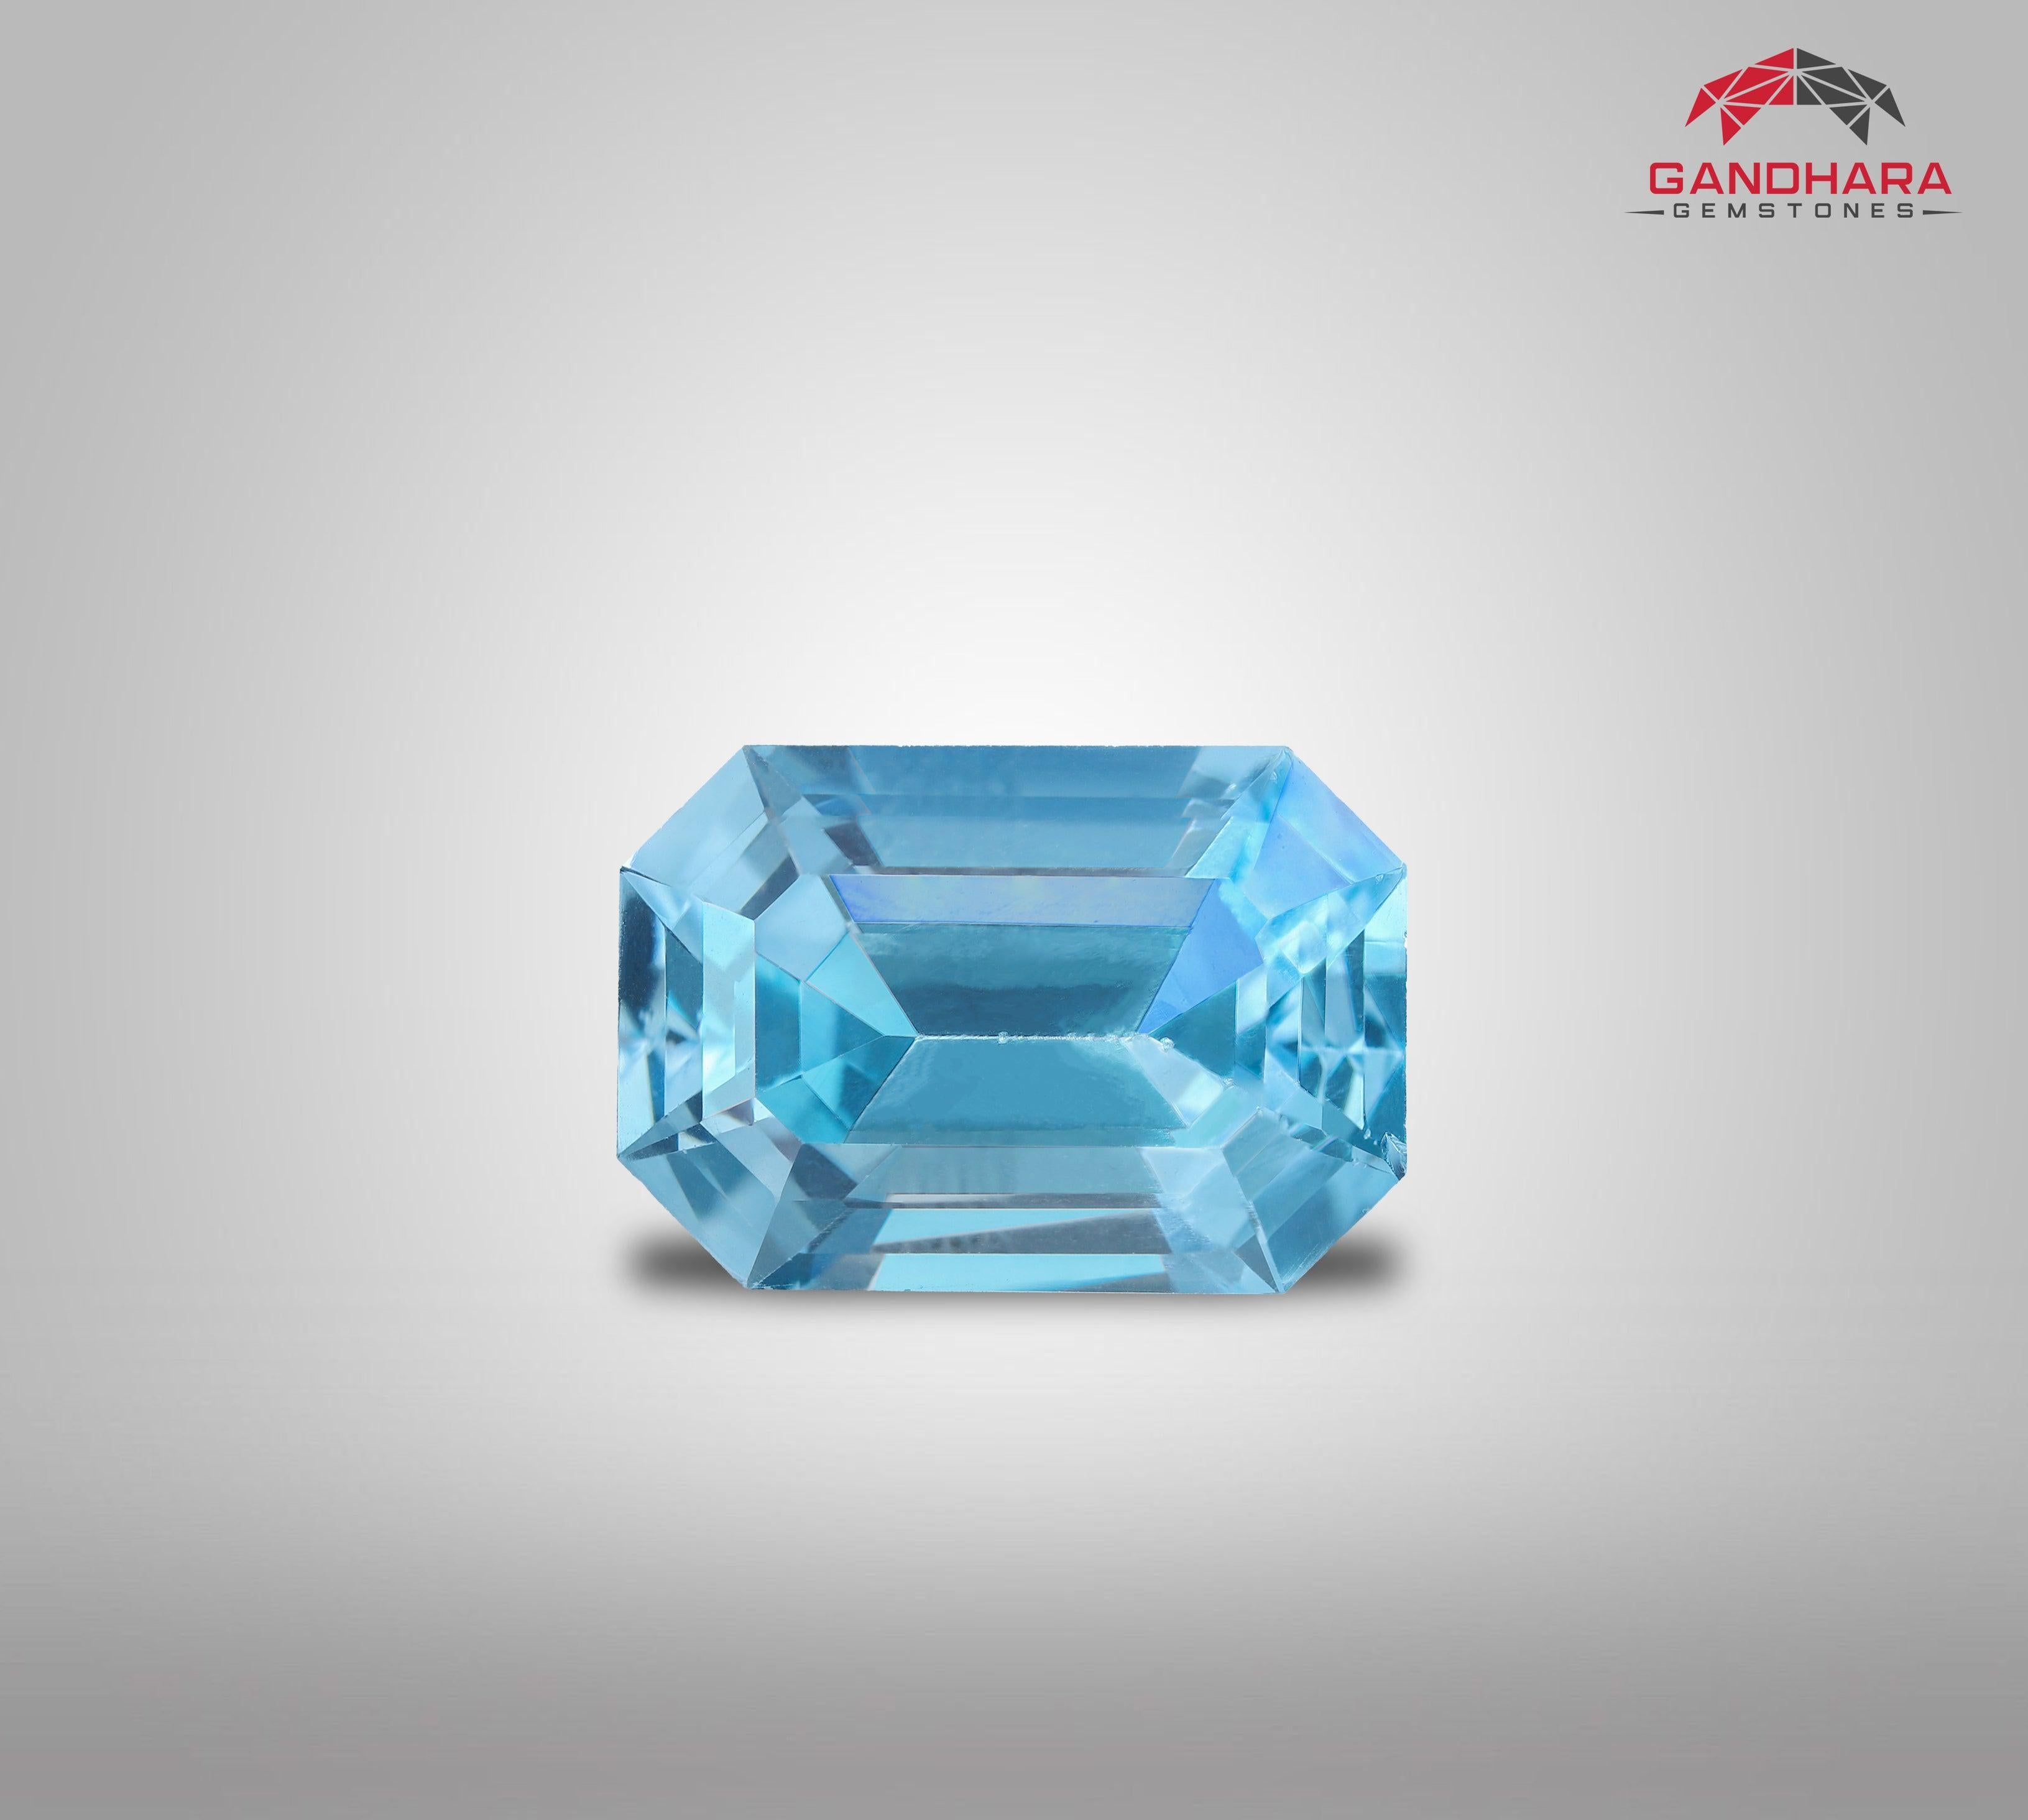 Marvelous Swiss Blue Topaz Gem, available for sale at wholesale price, natural high-quality 12.45 carats flawless loupe clean clarity, certified topaz from Madagascar.

Product Information:
GEMSTONE NAME	Marvelous Swiss Blue Topaz Gem
WEIGHT	12.45